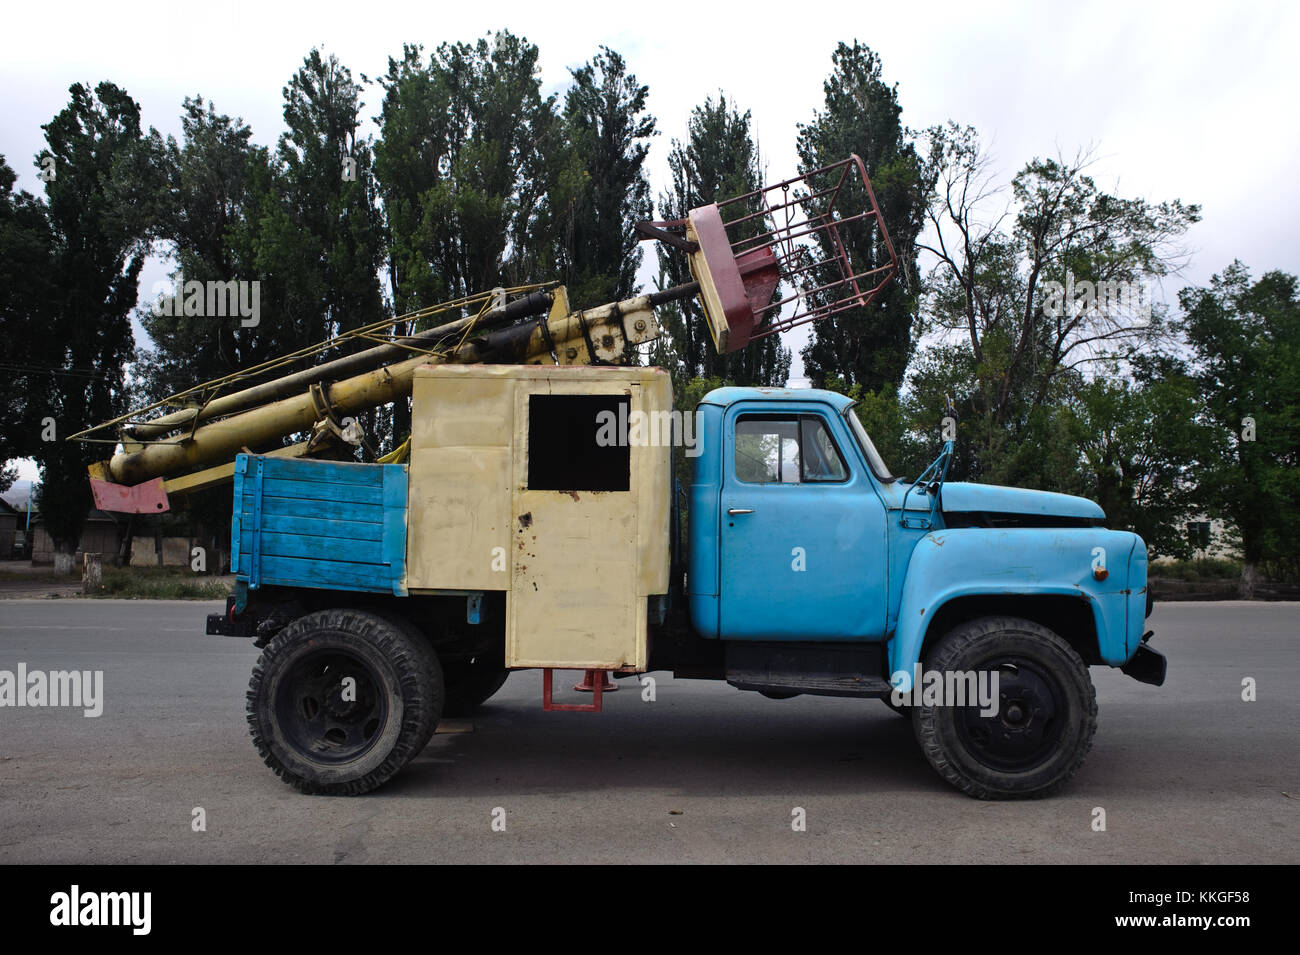 Bucket truck dating from the soviet period ( Kyrgyzstan) Stock Photo